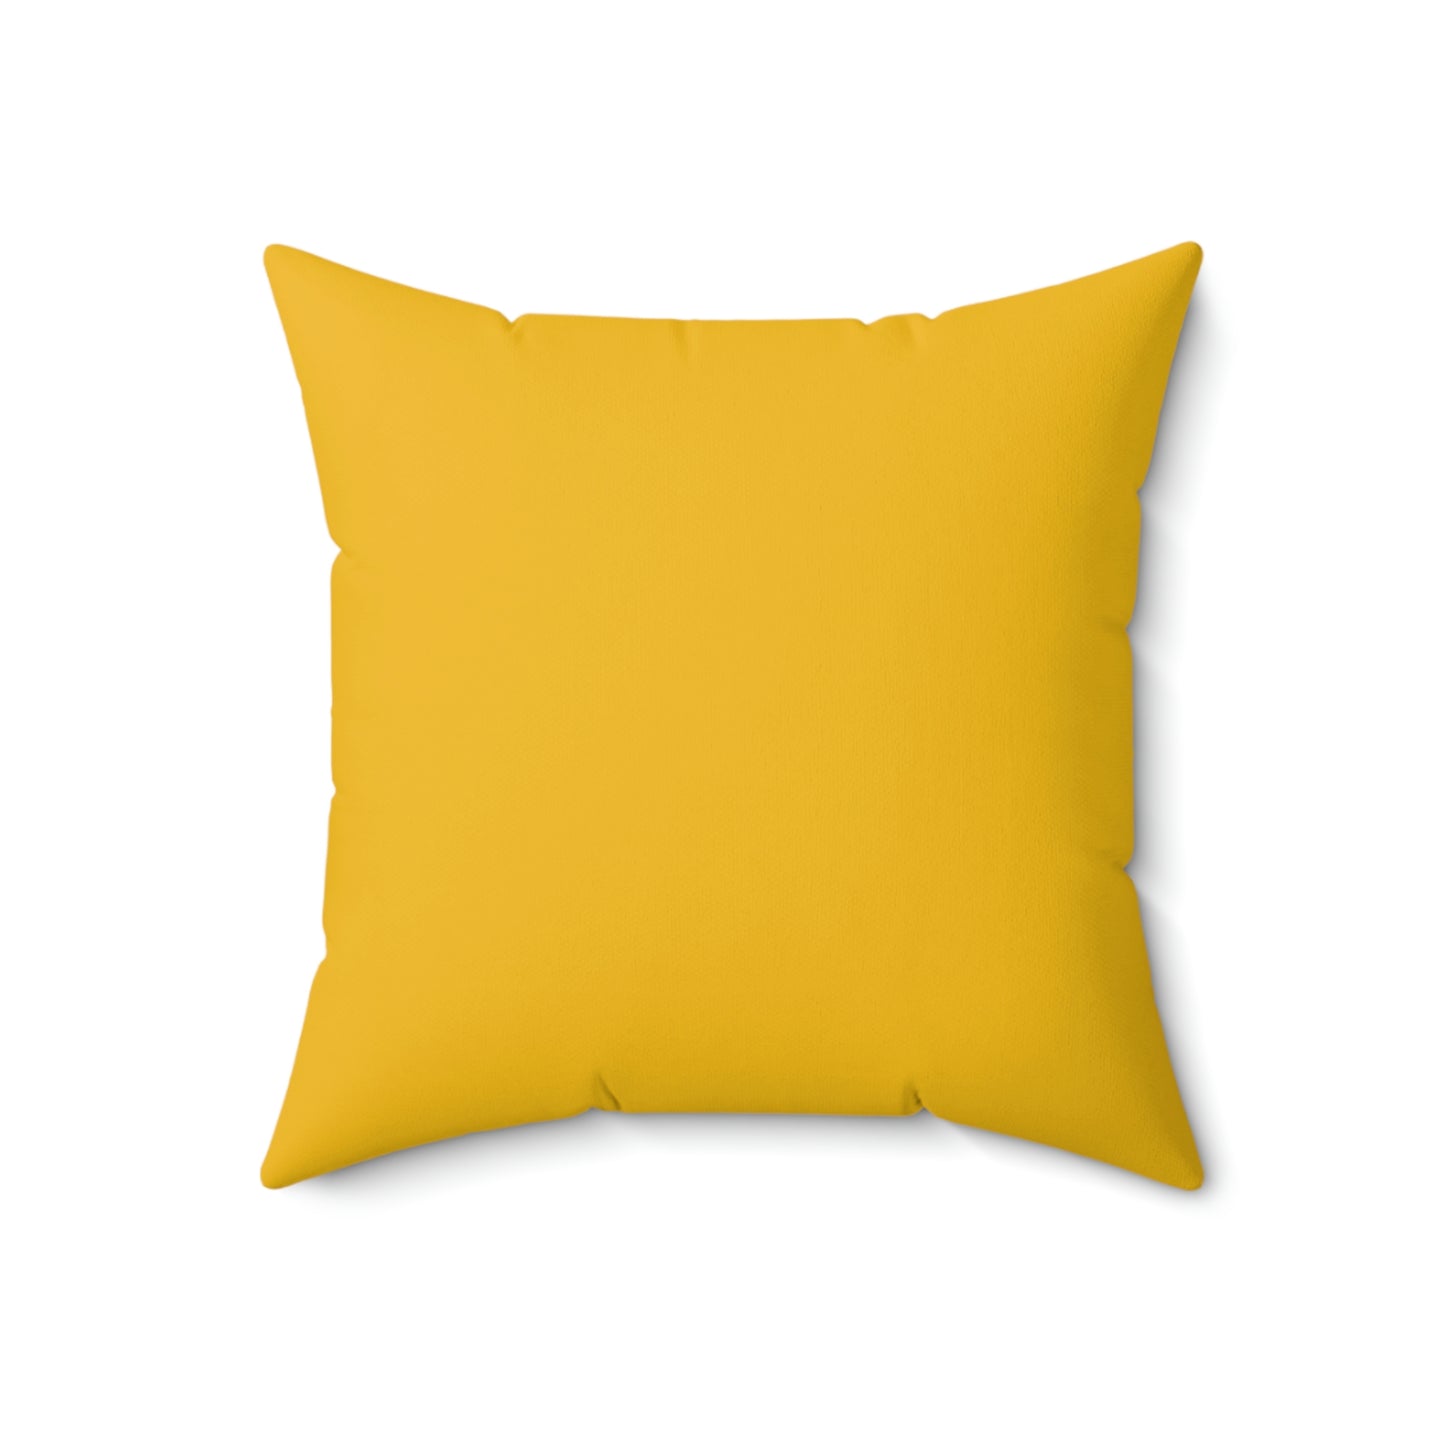 Spun Polyester Square Pillow Case "Dad Level Unlocked on Yellow”